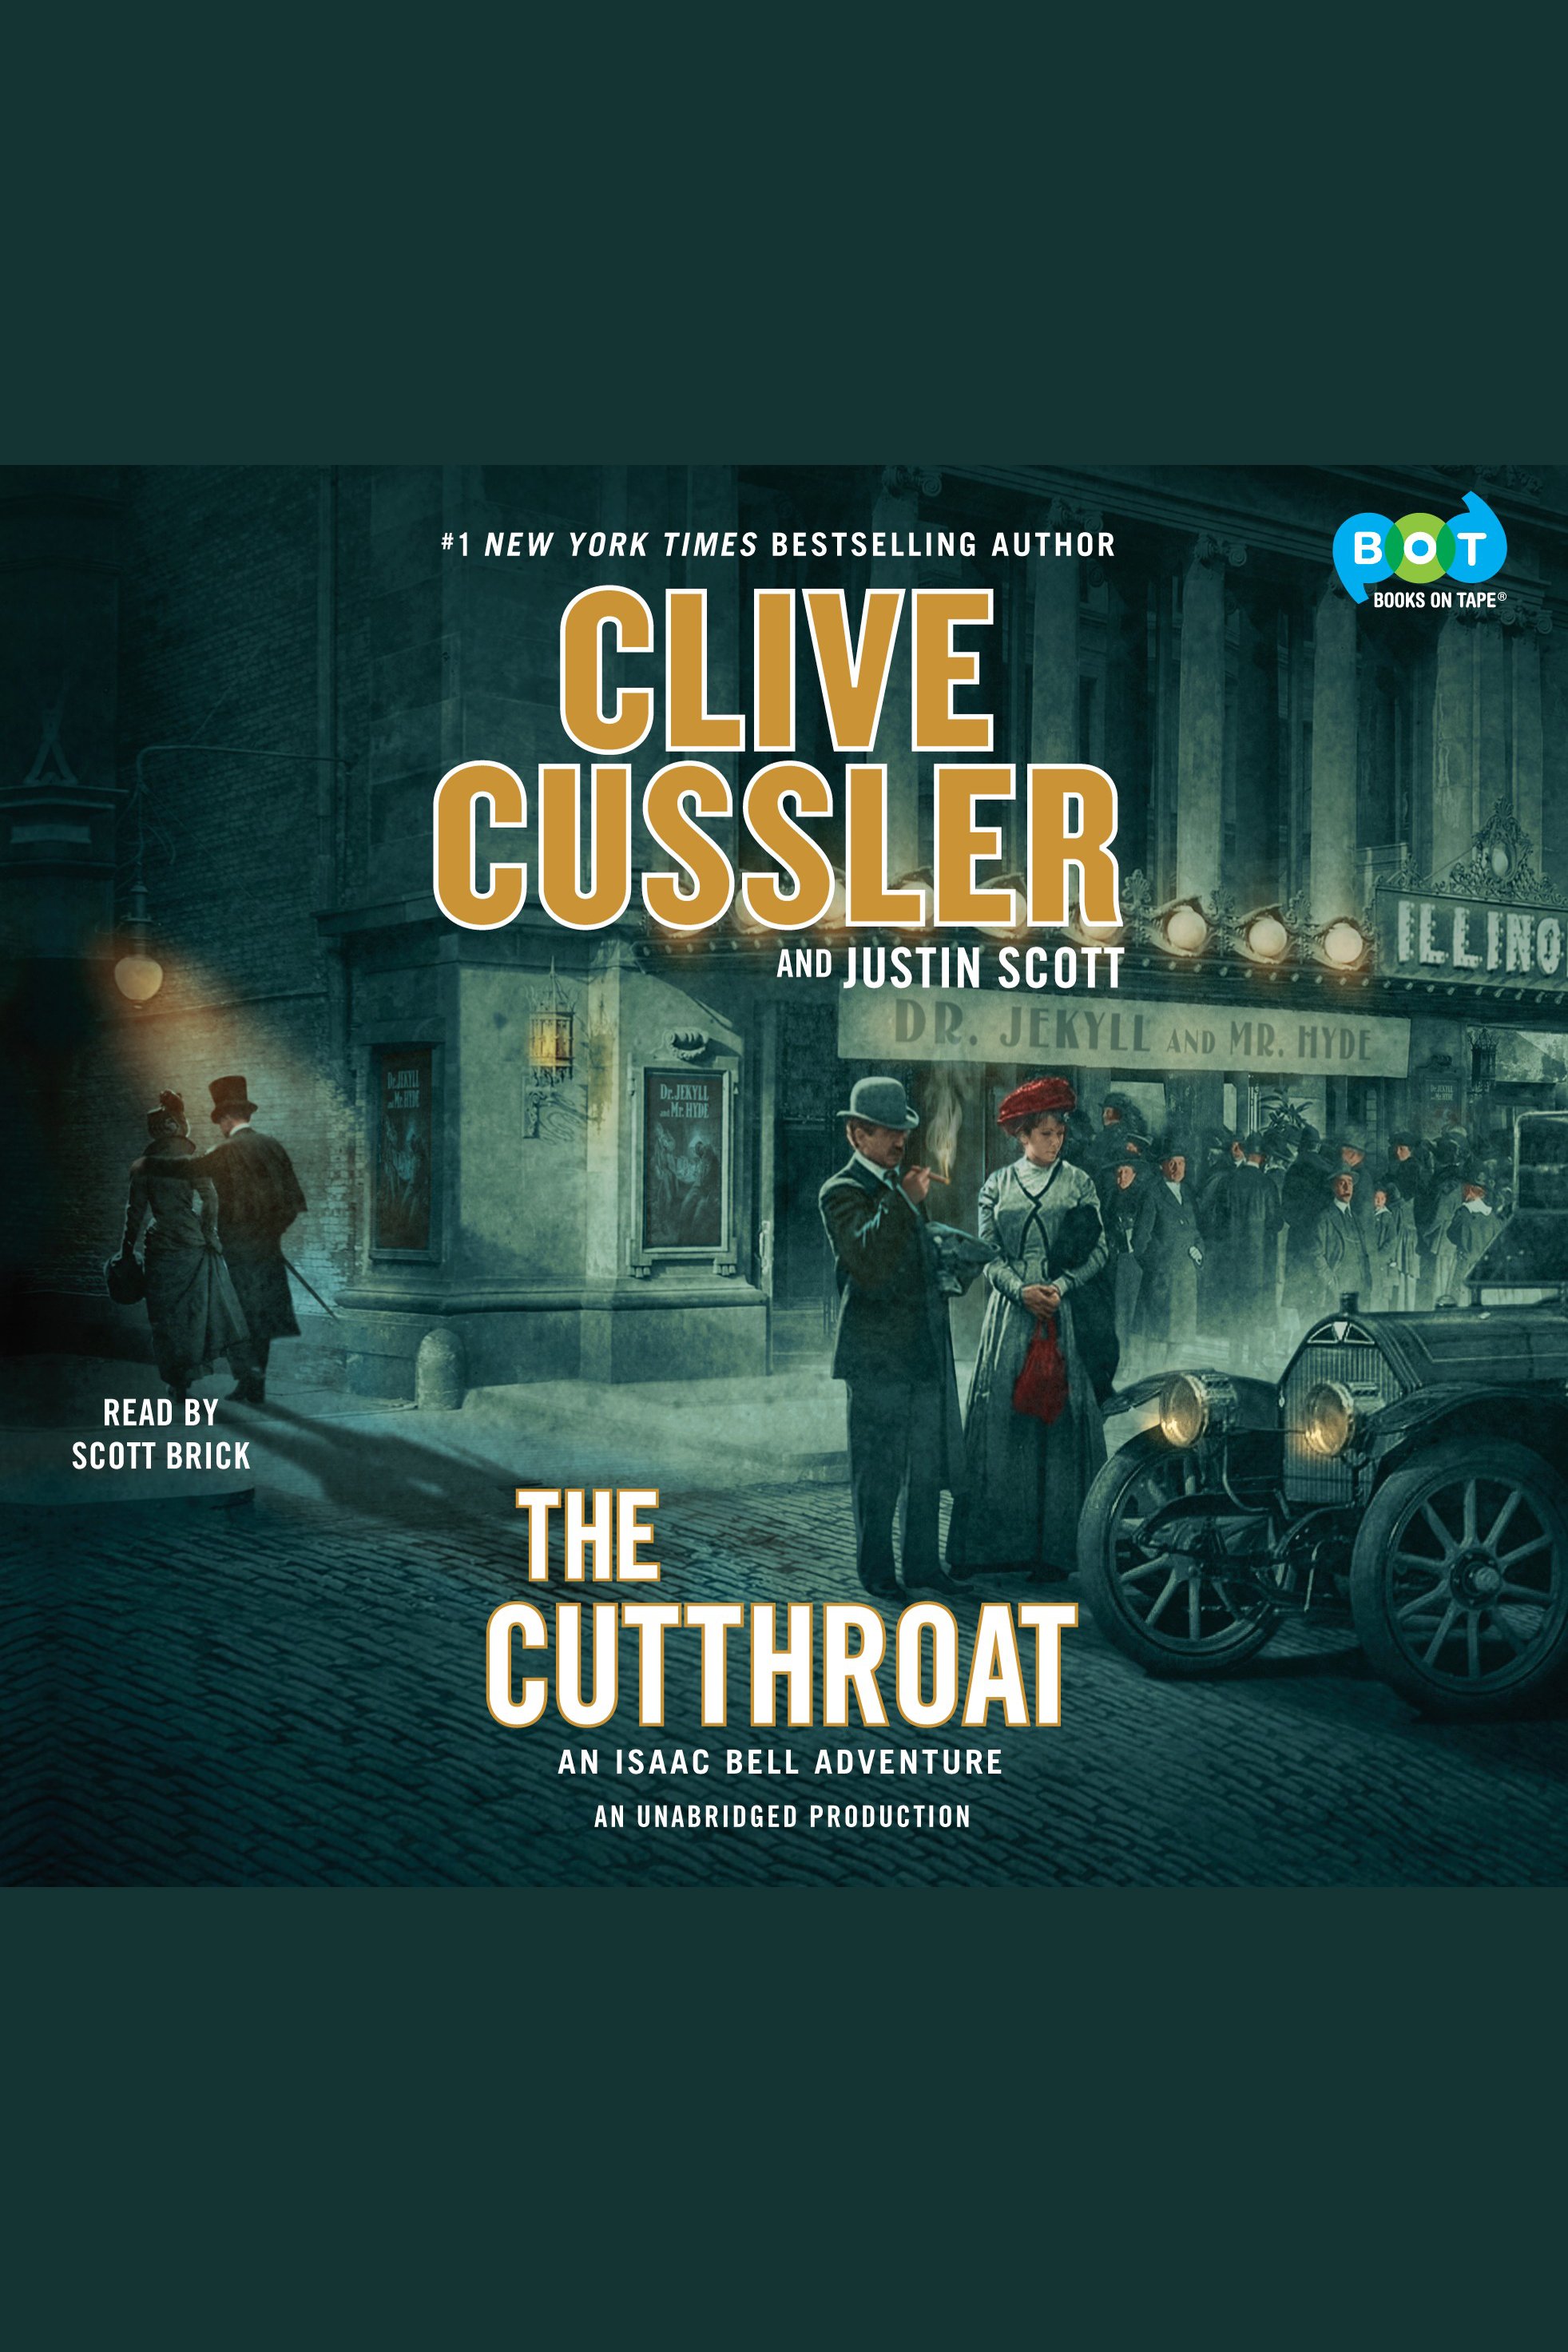 The cutthroat cover image